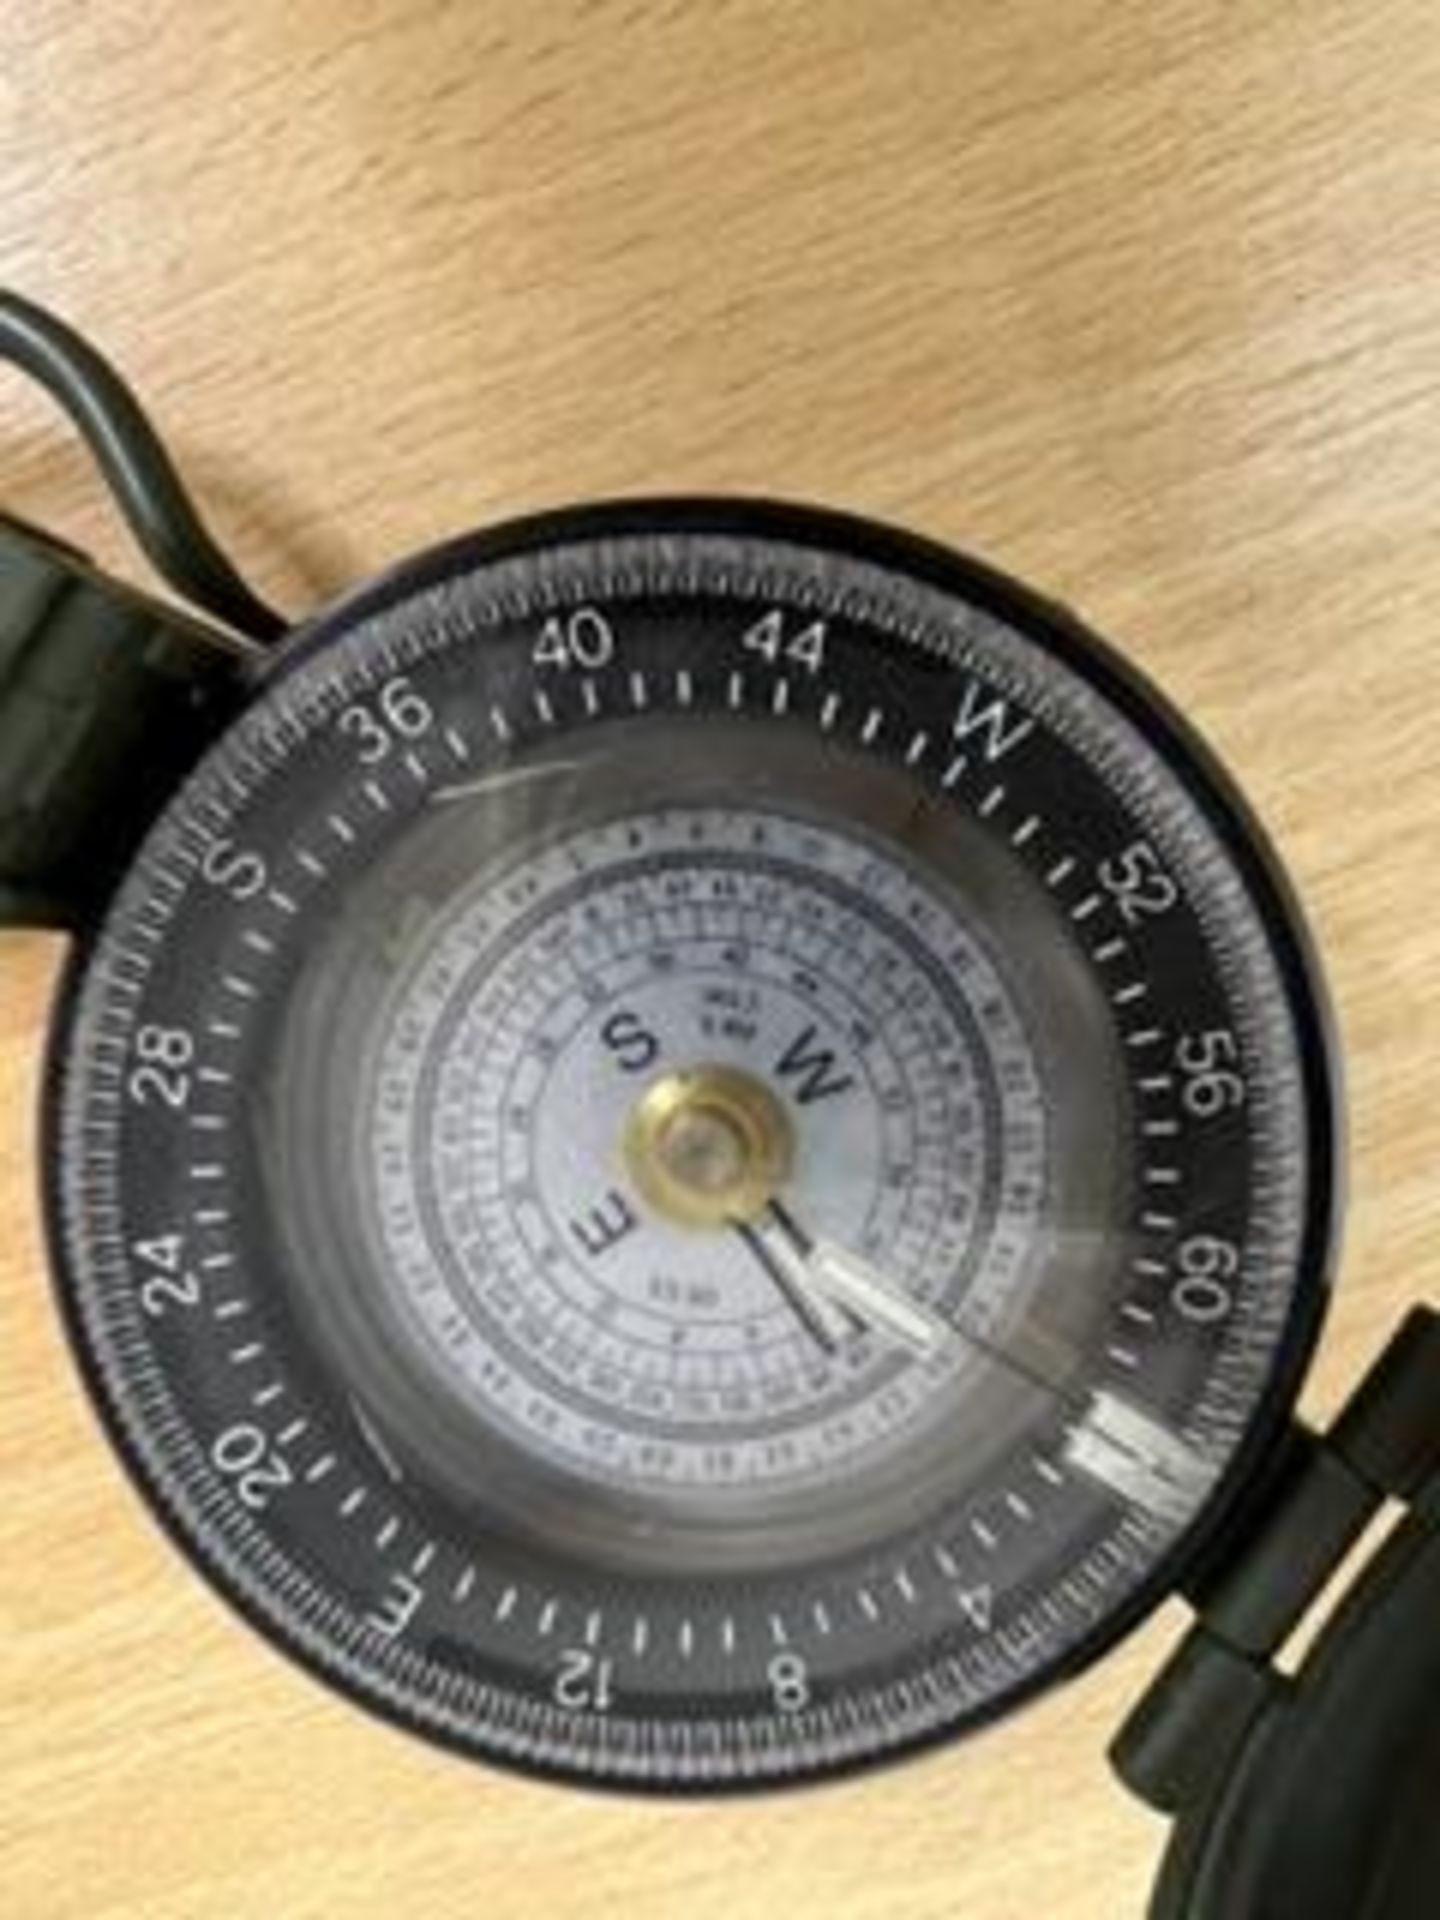 UNISSUED FRANCIS BAKER M88 PRISMATIC COMPASS NATO MARKINGS IN MILS - Image 5 of 7